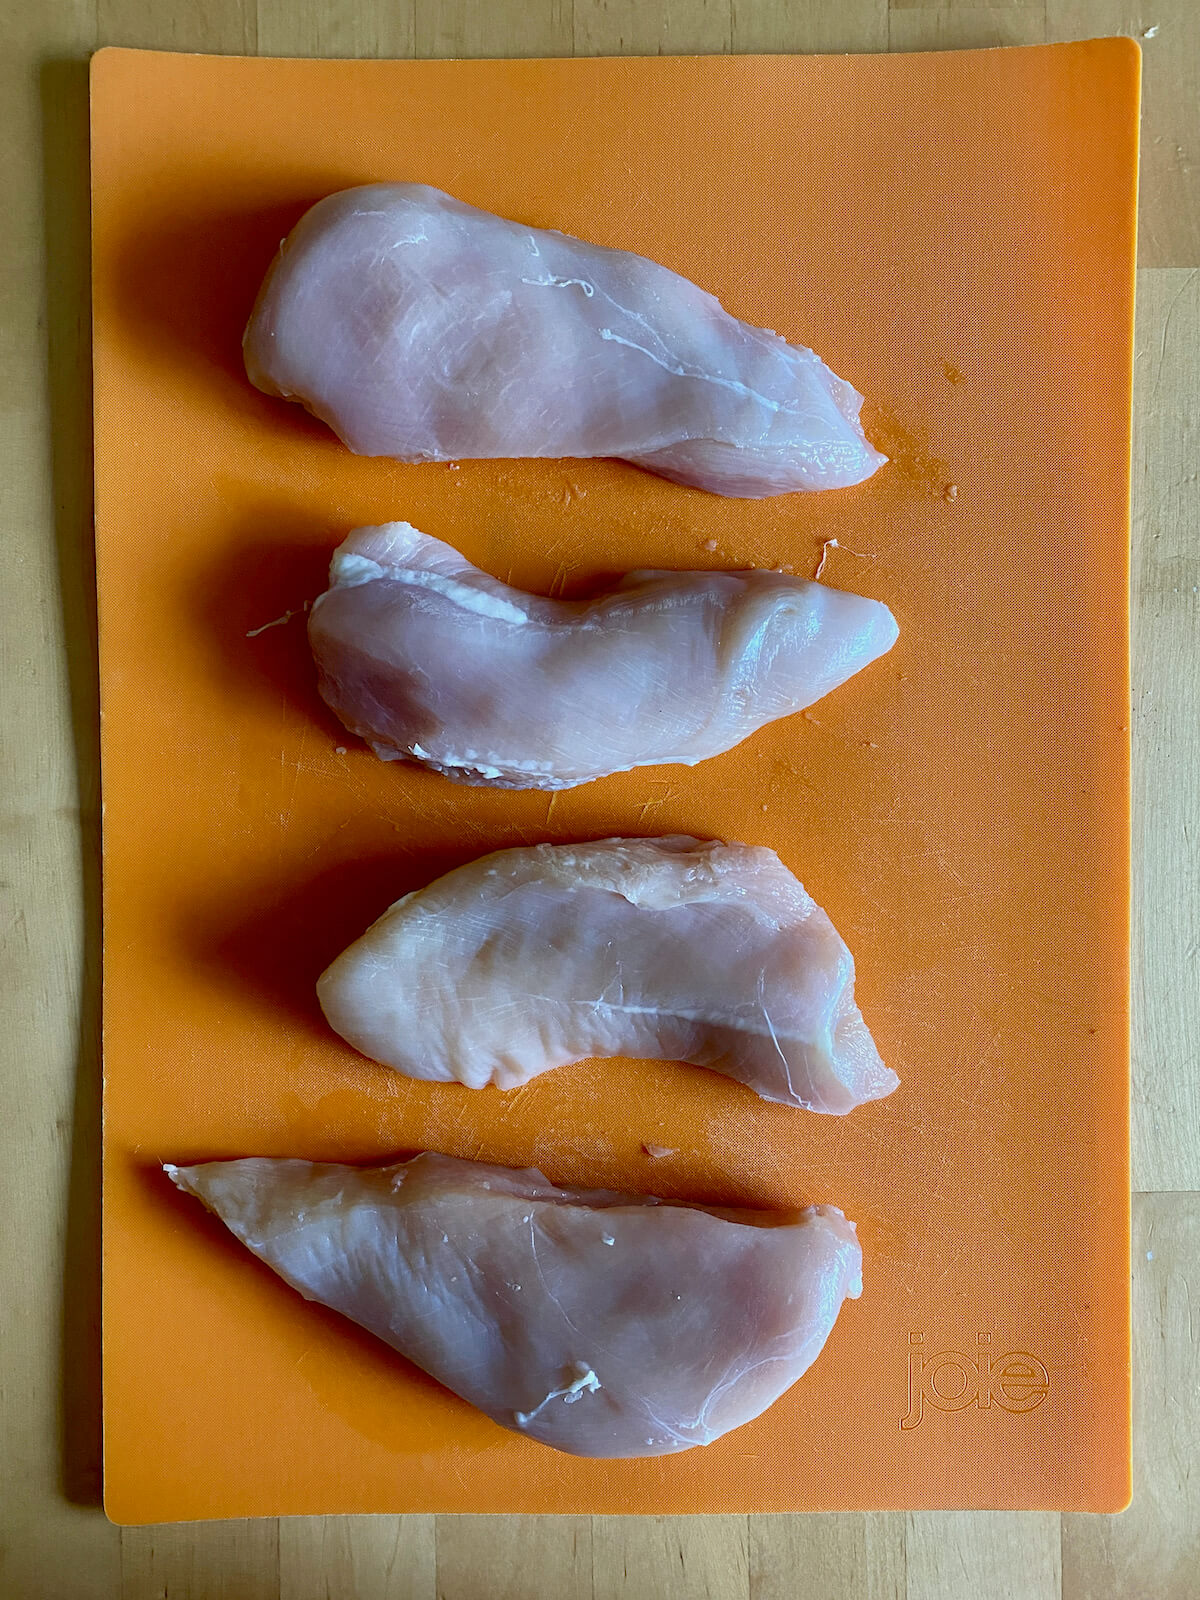 Four trimmed and cut chicken breasts on an orange cutting board.